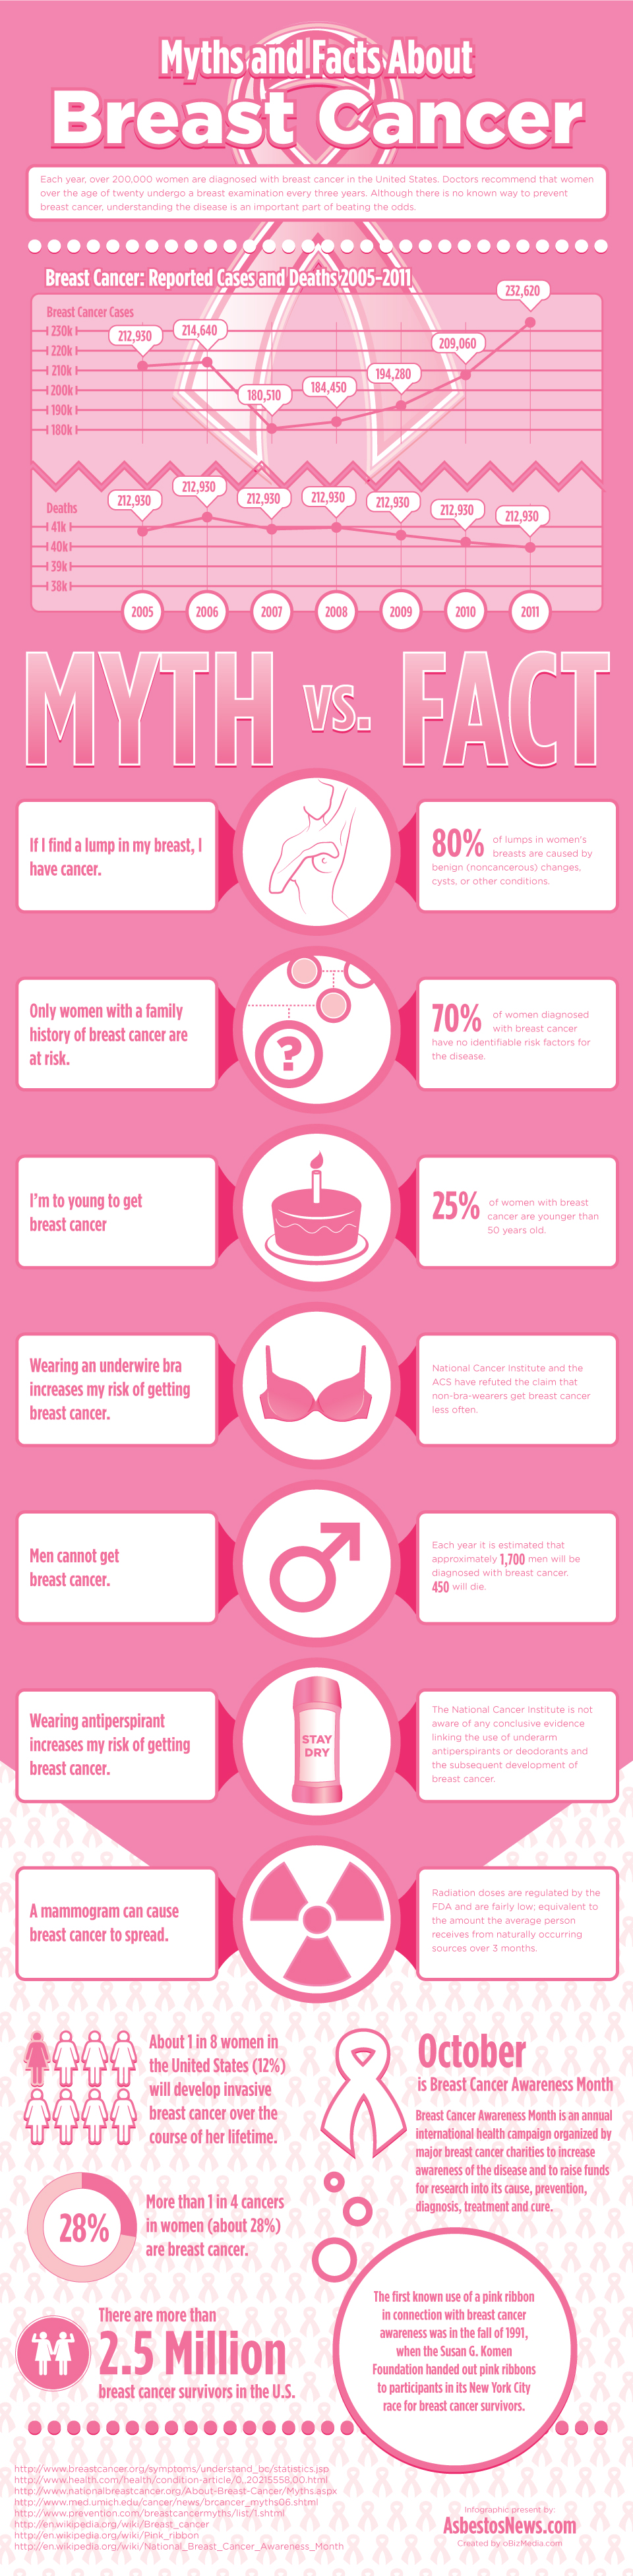 Breast-Cancer-information-facts-health-infographic